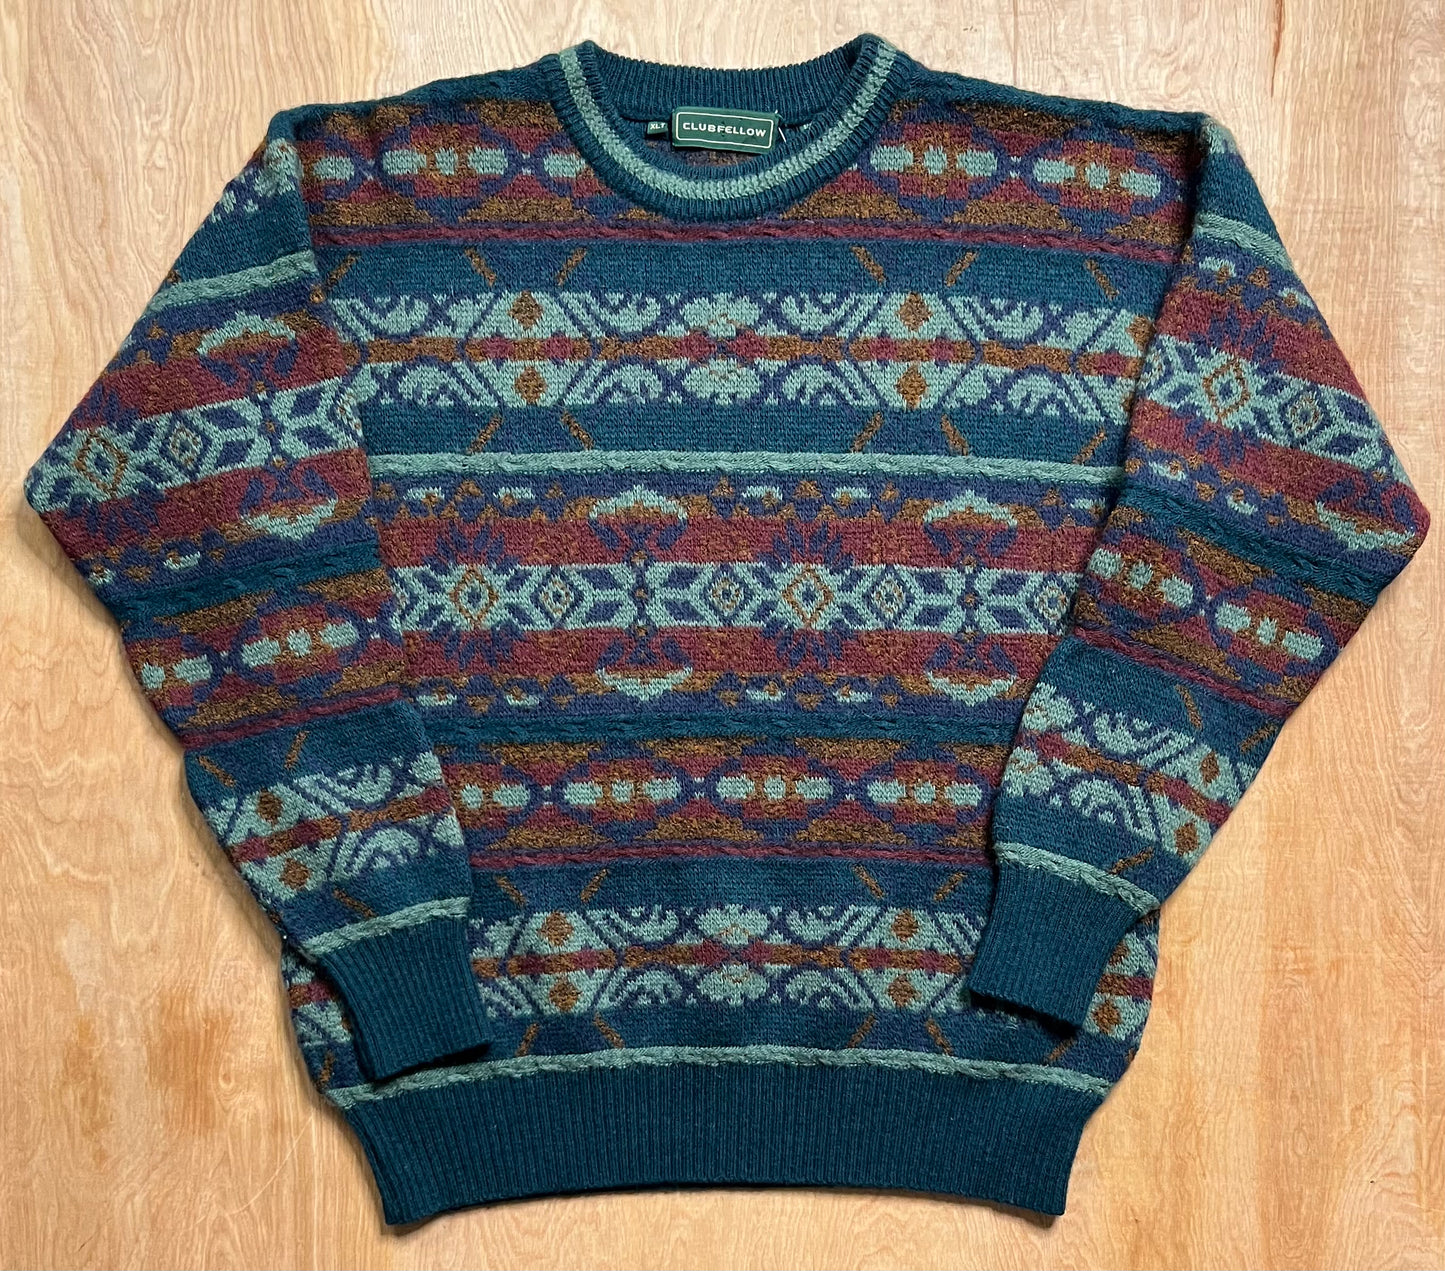 Vintage Clubfellow Sweater